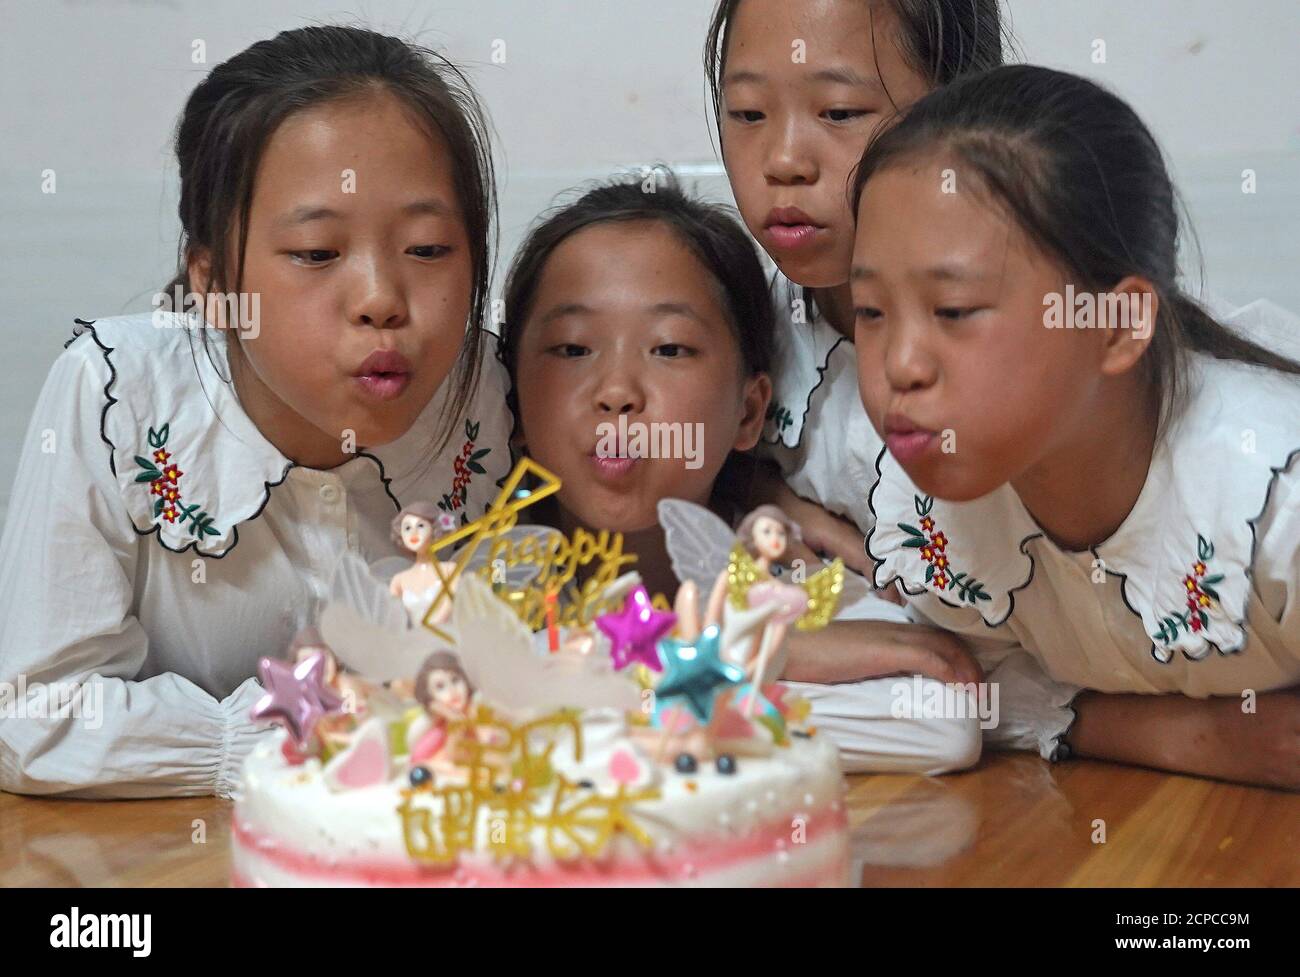 (200919) -- GANZHOU, Sept. 19, 2020 (Xinhua) -- The quadruplet girls celebrate their birthday at their new house in Shangbao Village, Ganzhou City of east China's Jiangxi Province, Sept. 10, 2020. Wu Nianyou, a farmer in Shangbao Village of Ganzhou City, and his wife saw their quadruplet daughters come to the world on a morning in September 2010. They named their daughters Wu Mengling, Wu Mengting, Wu Mengyun and Wu Mengqin, who became their worry to raise up with little income only from the fields. Being premature babies, the girls were in poor health conditions which needed lots of money to Stock Photo